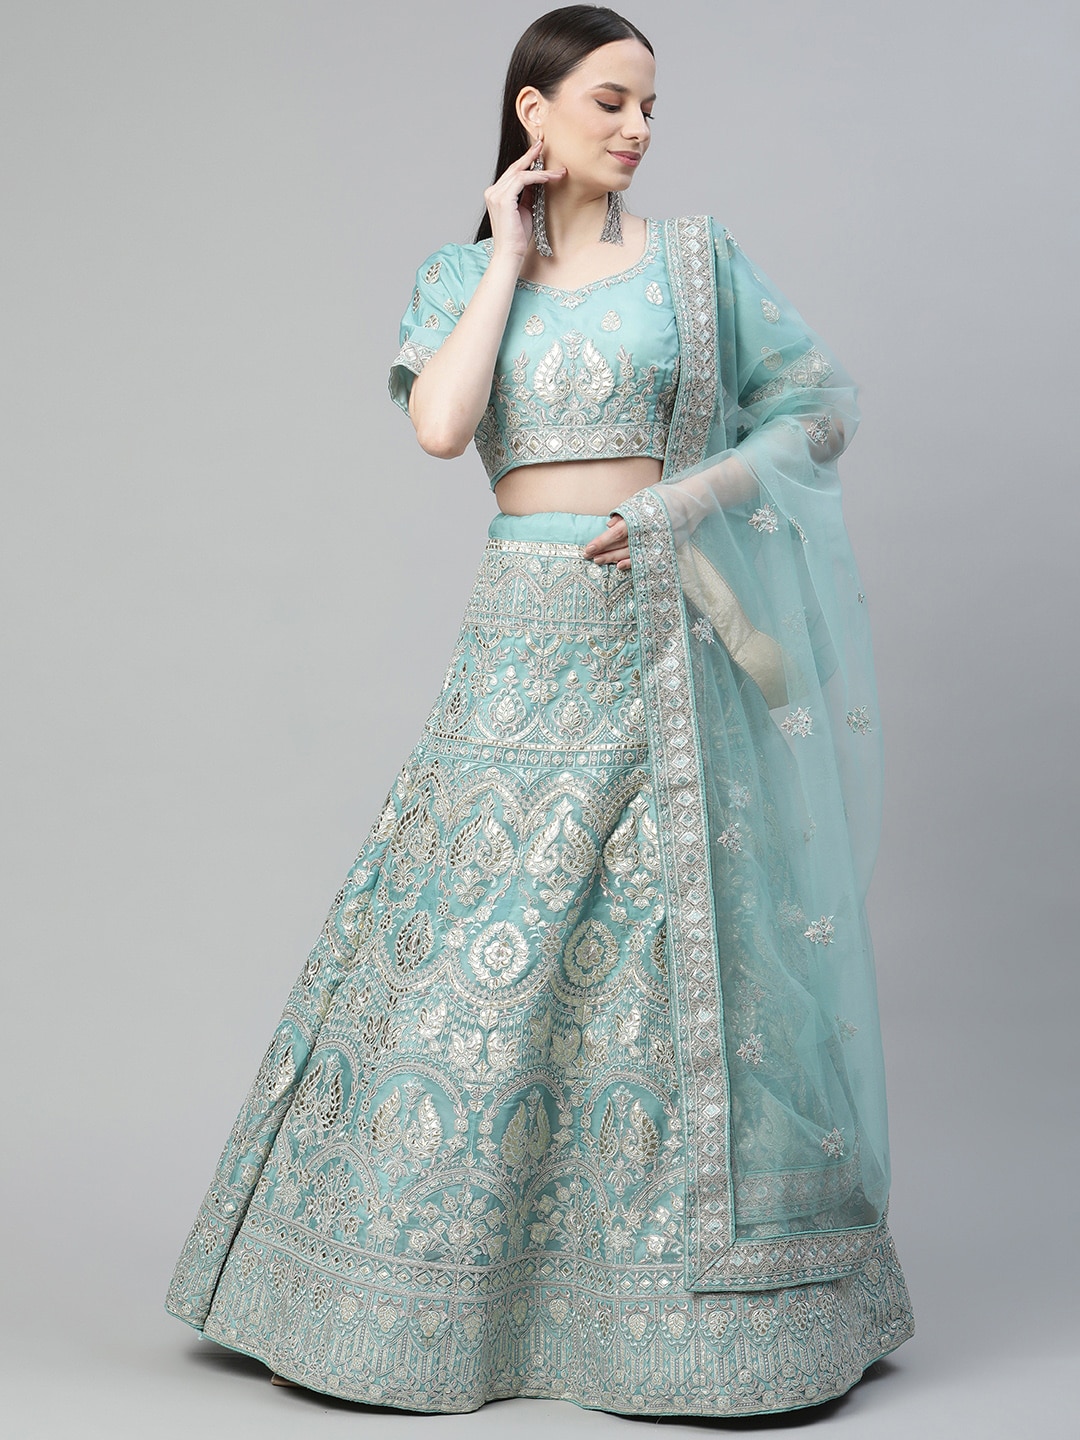 Readiprint Fashions Turquoise Blue Embroidered Unstitched Lehenga & Blouse With Dupatta Price in India